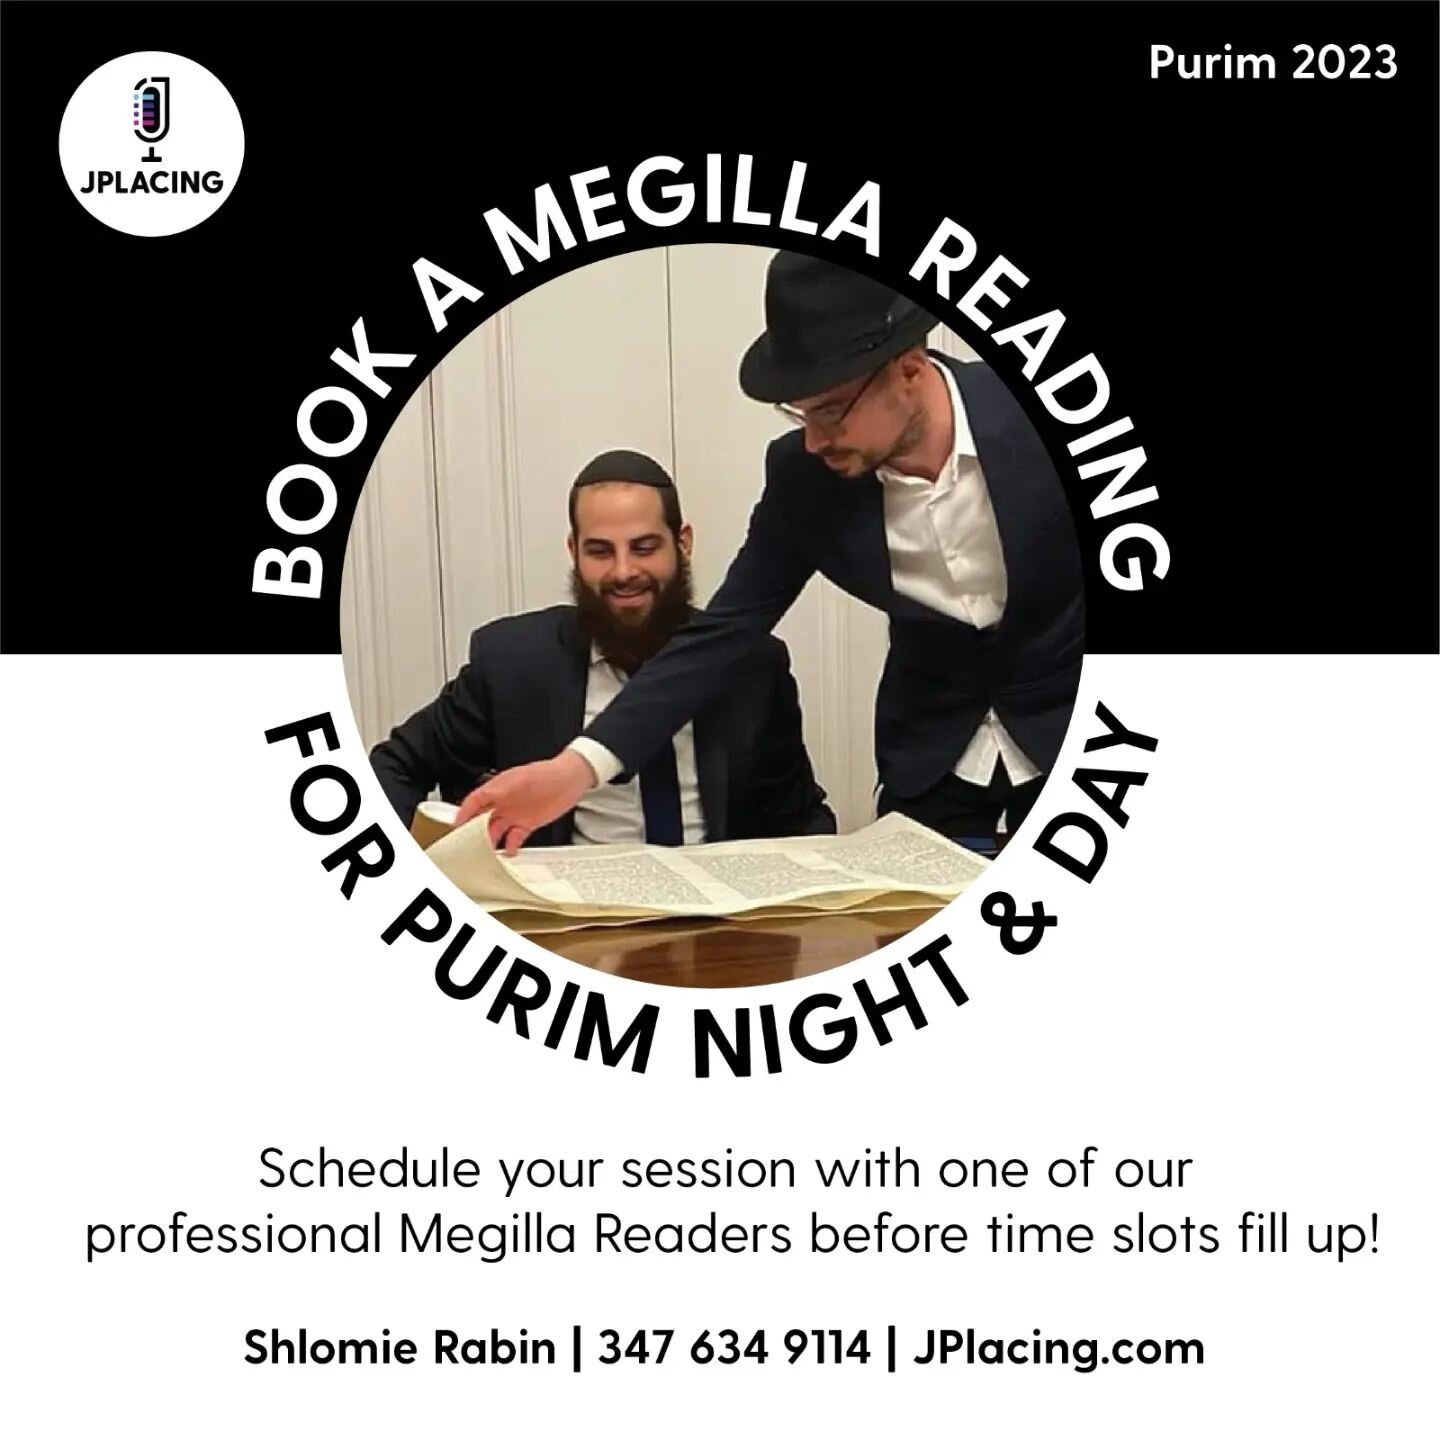 Purim is here and in addition to music, singers and entertainment we now offer a Megilla Reader Matching Service! 

Get in touch to book your megilla reading before the slot gets taken!